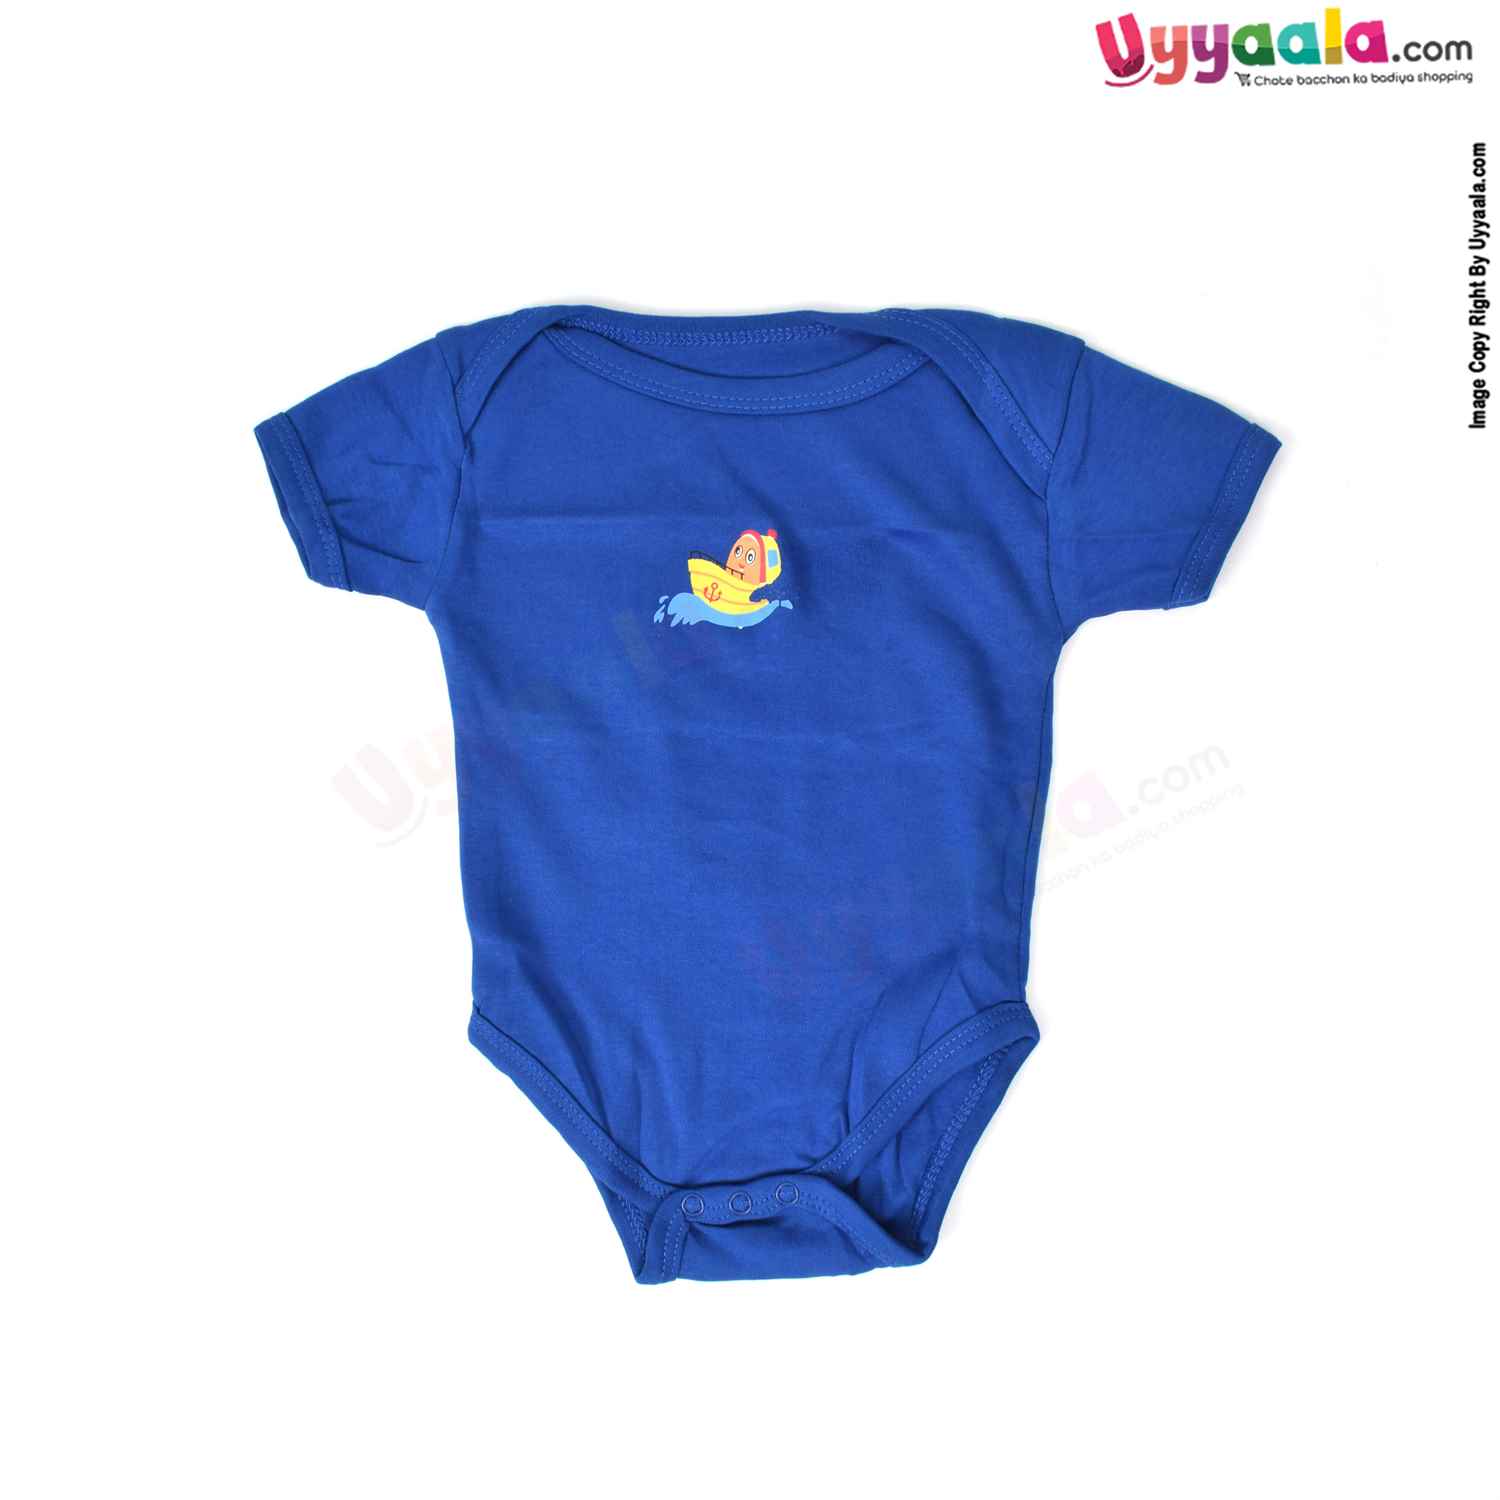 Precious One Short Sleeve Body Suit 100% Soft Hosiery Cotton - Blue with Boat Print (6-9M)